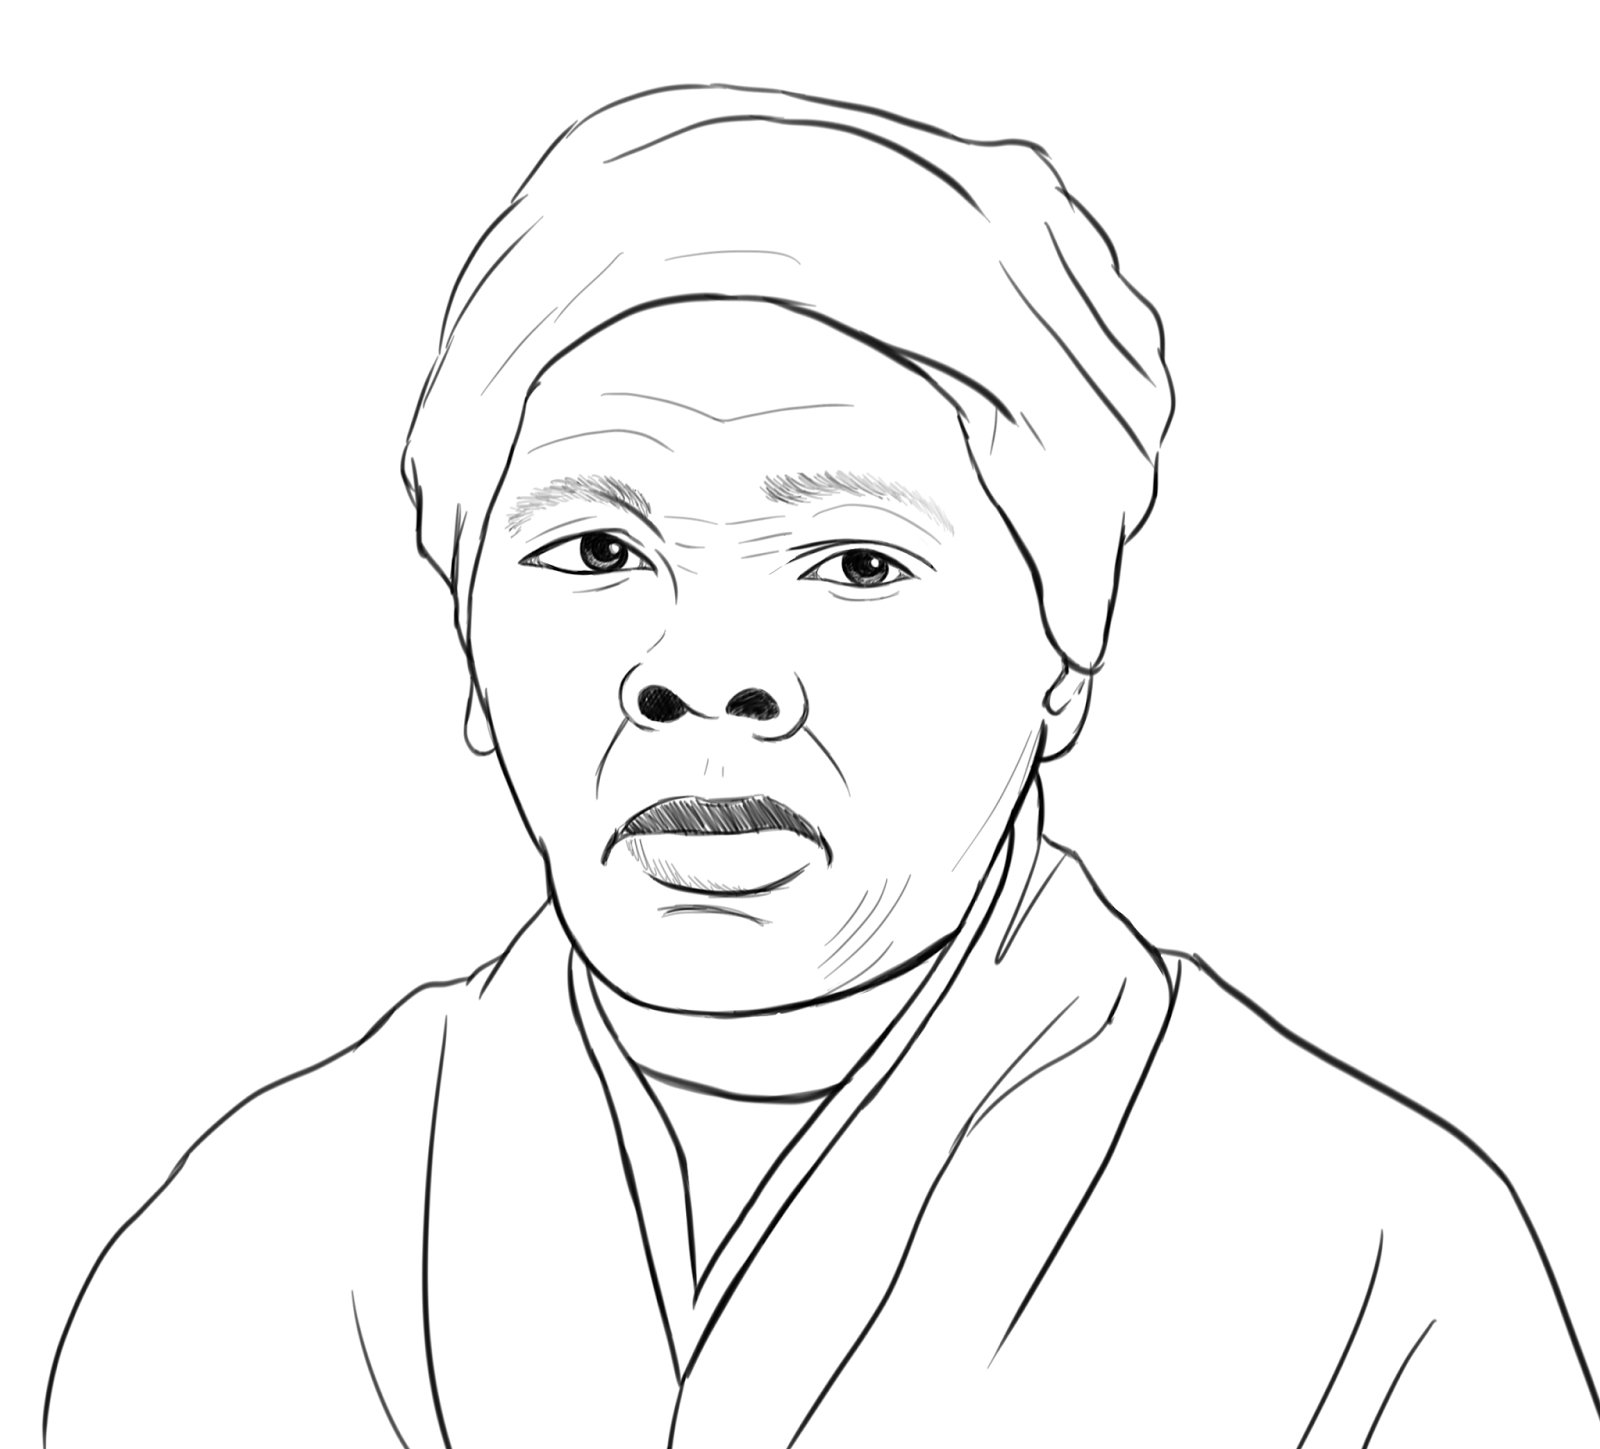 Harriet Tubman Coloring Page Sheets, harriet tubman coloring page ...